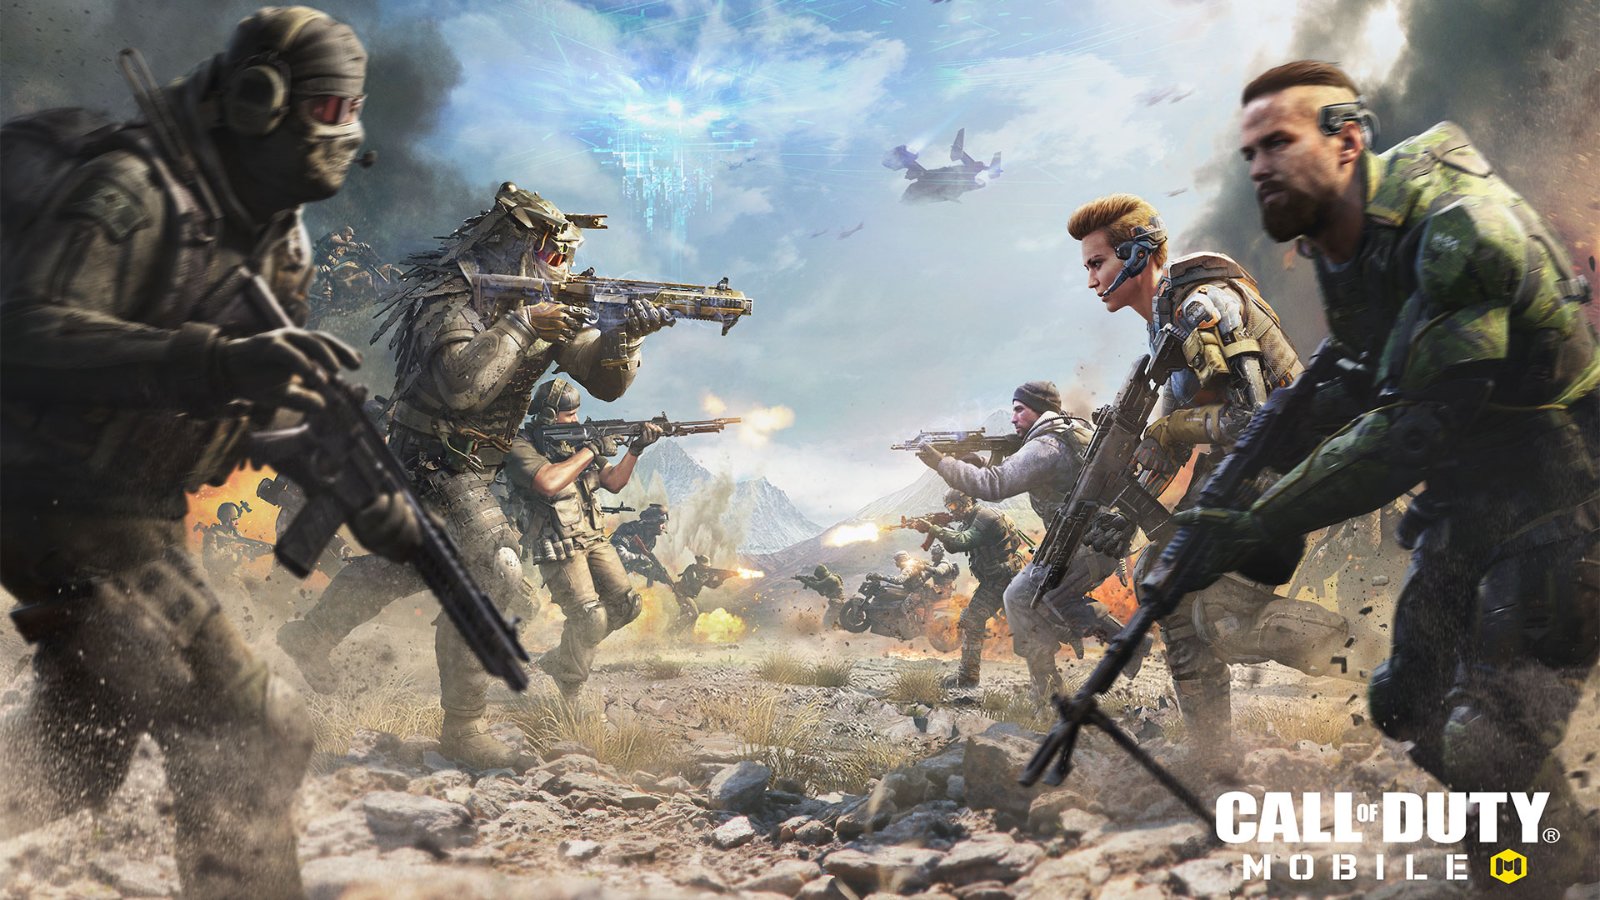 Call of Duty Mobile Season 3 Brings Some Exciting Changes